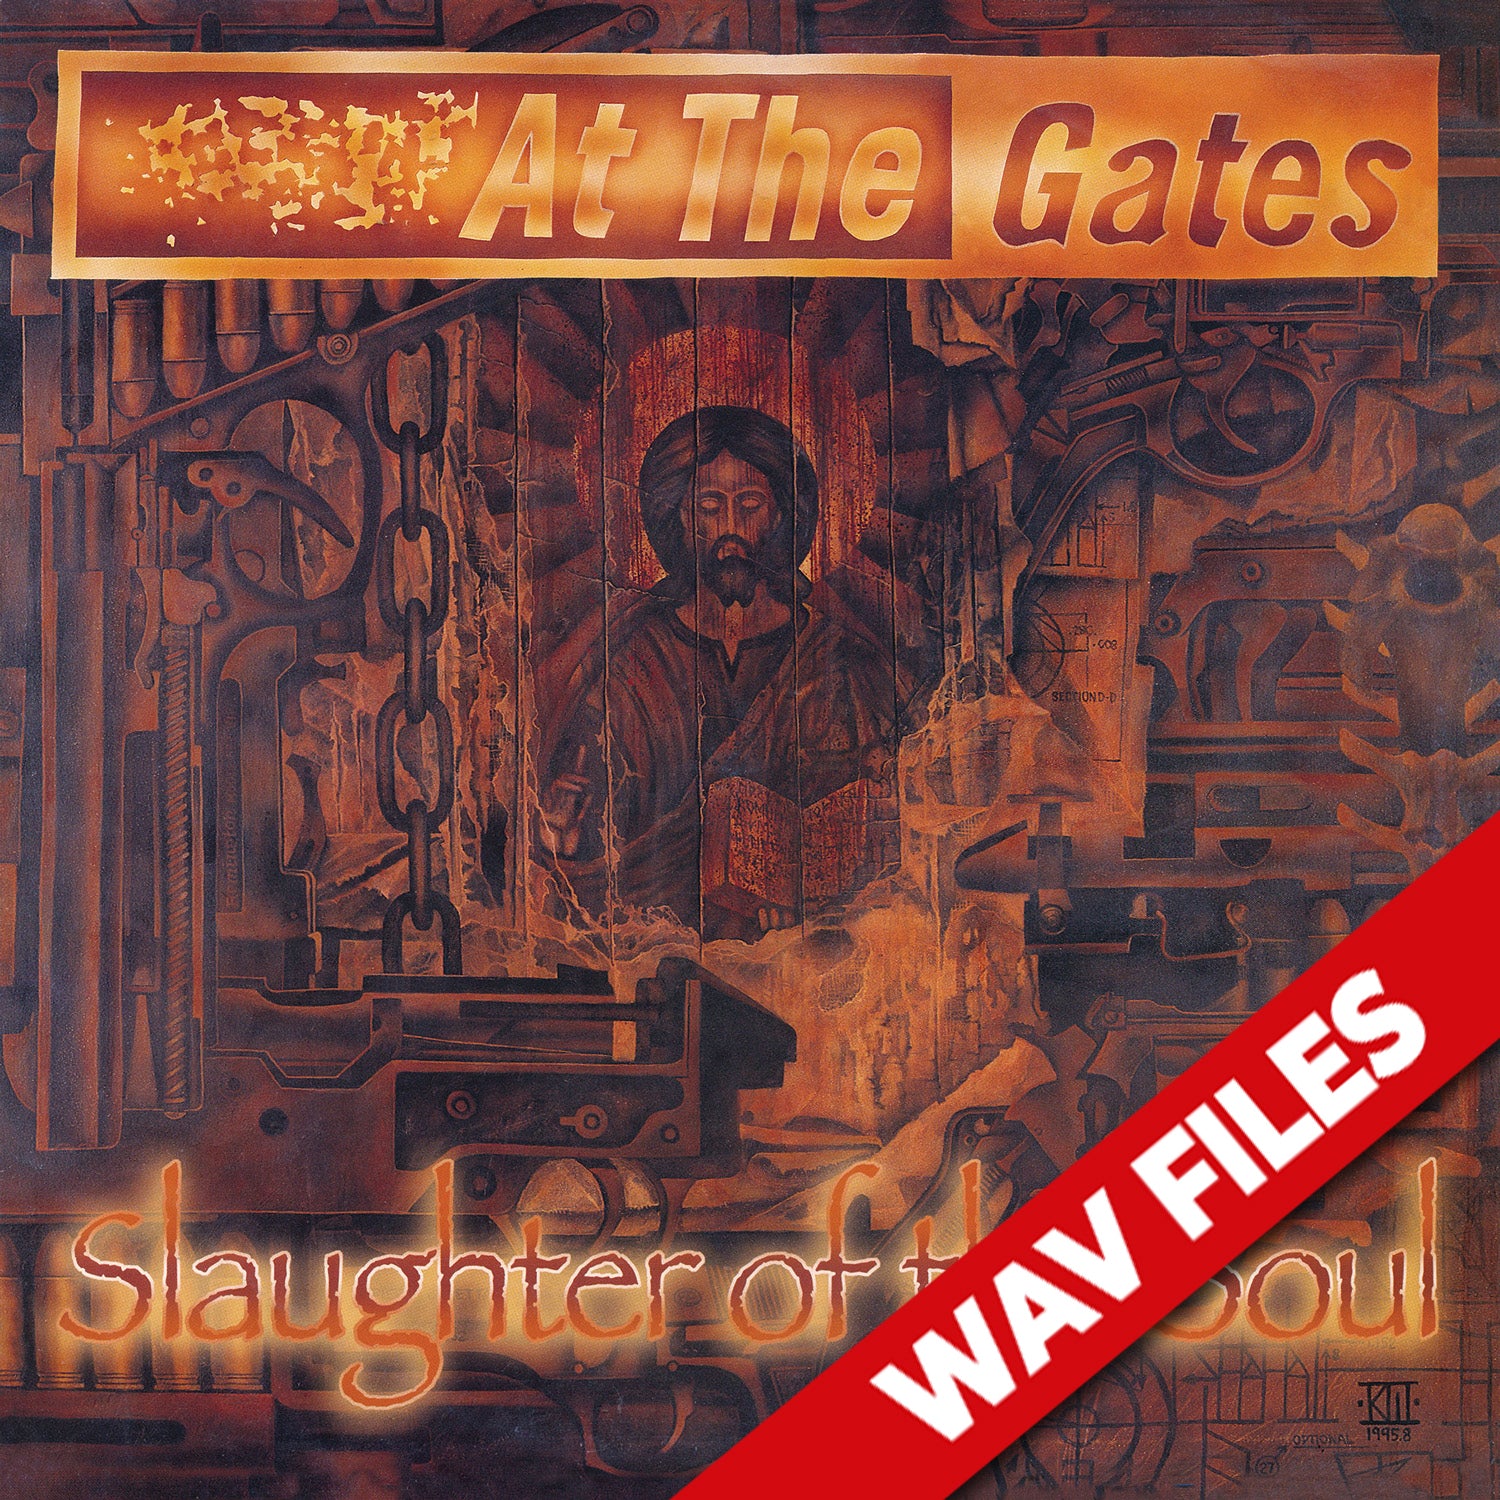 At The Gates "Slaughter Of The Soul" FDR Digital Download